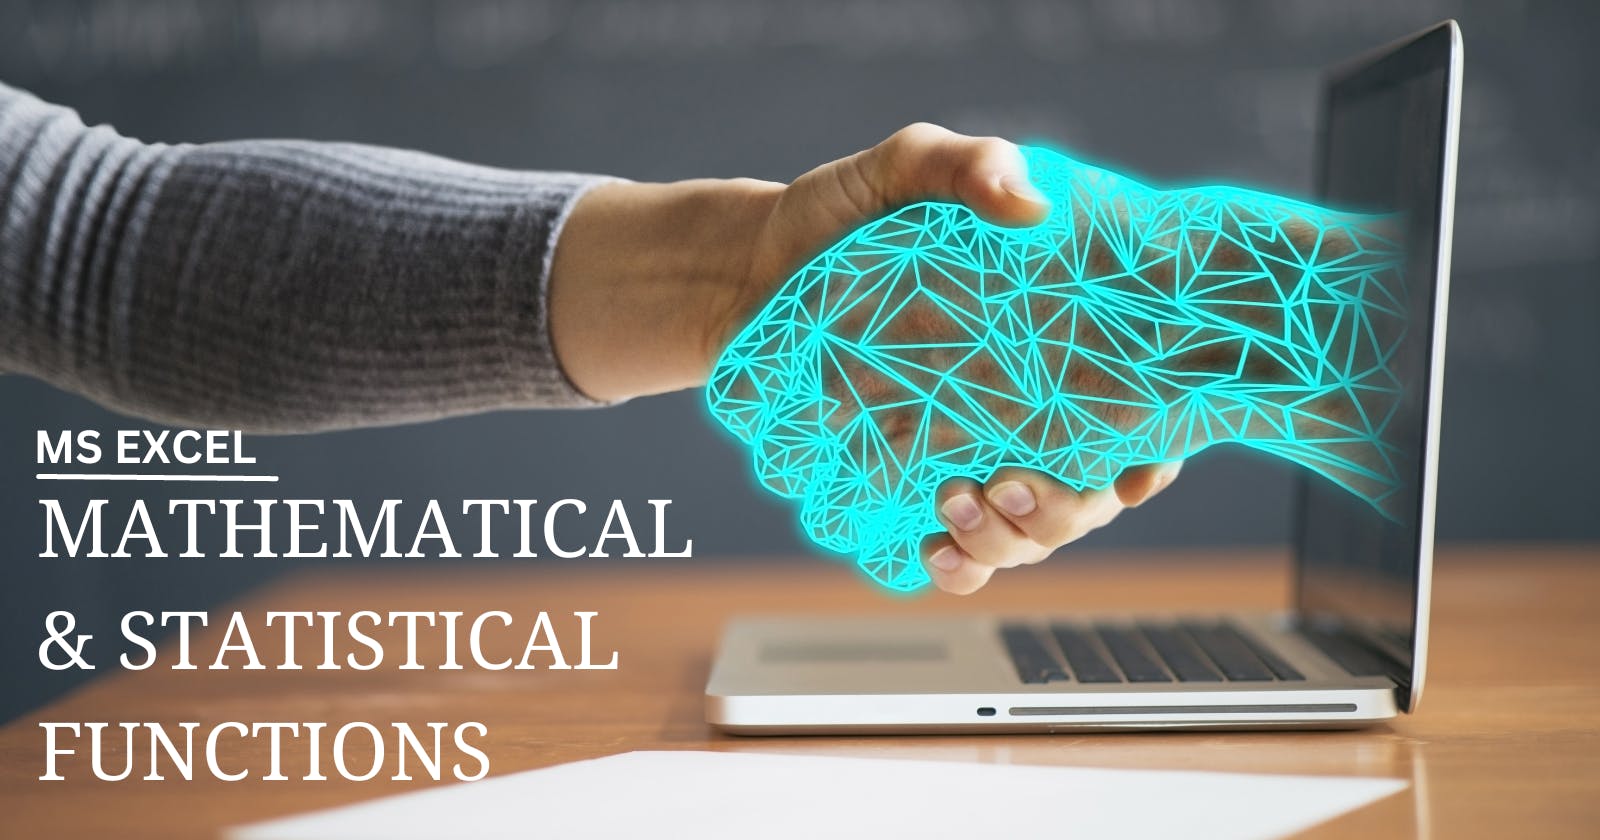 Mathematical & Statistical Functions